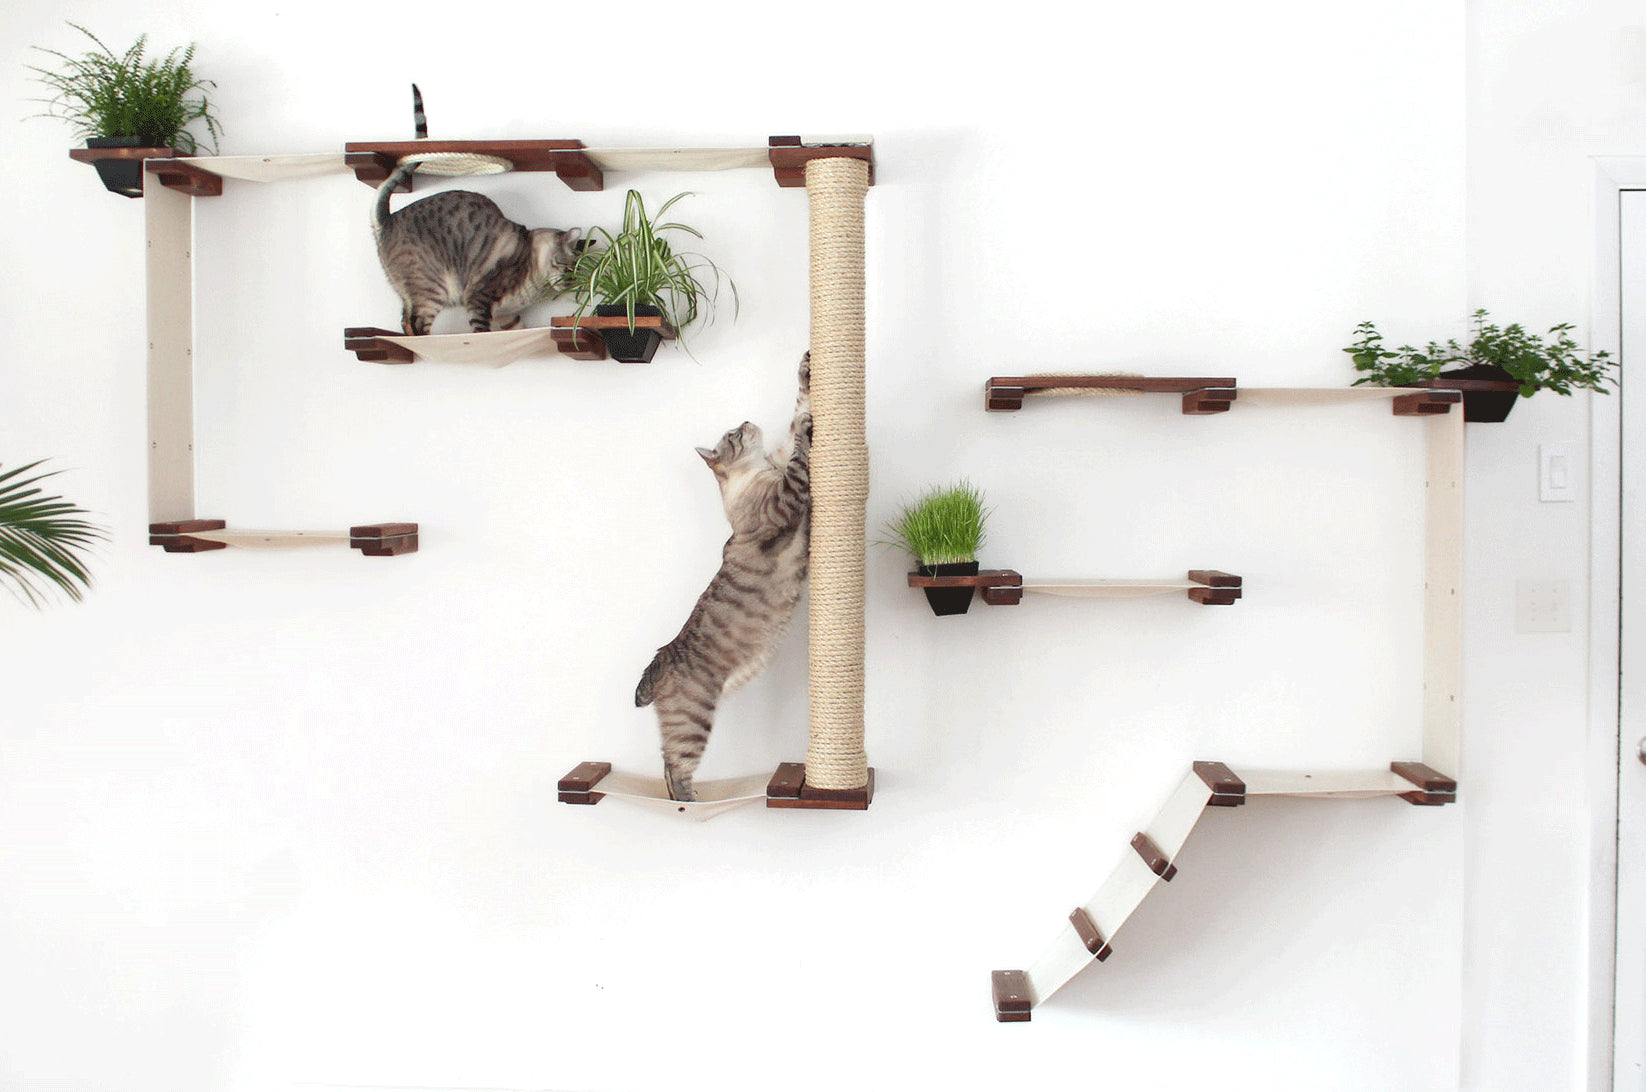 Catastrophicreations Cat Wall | Smack Bang Blog